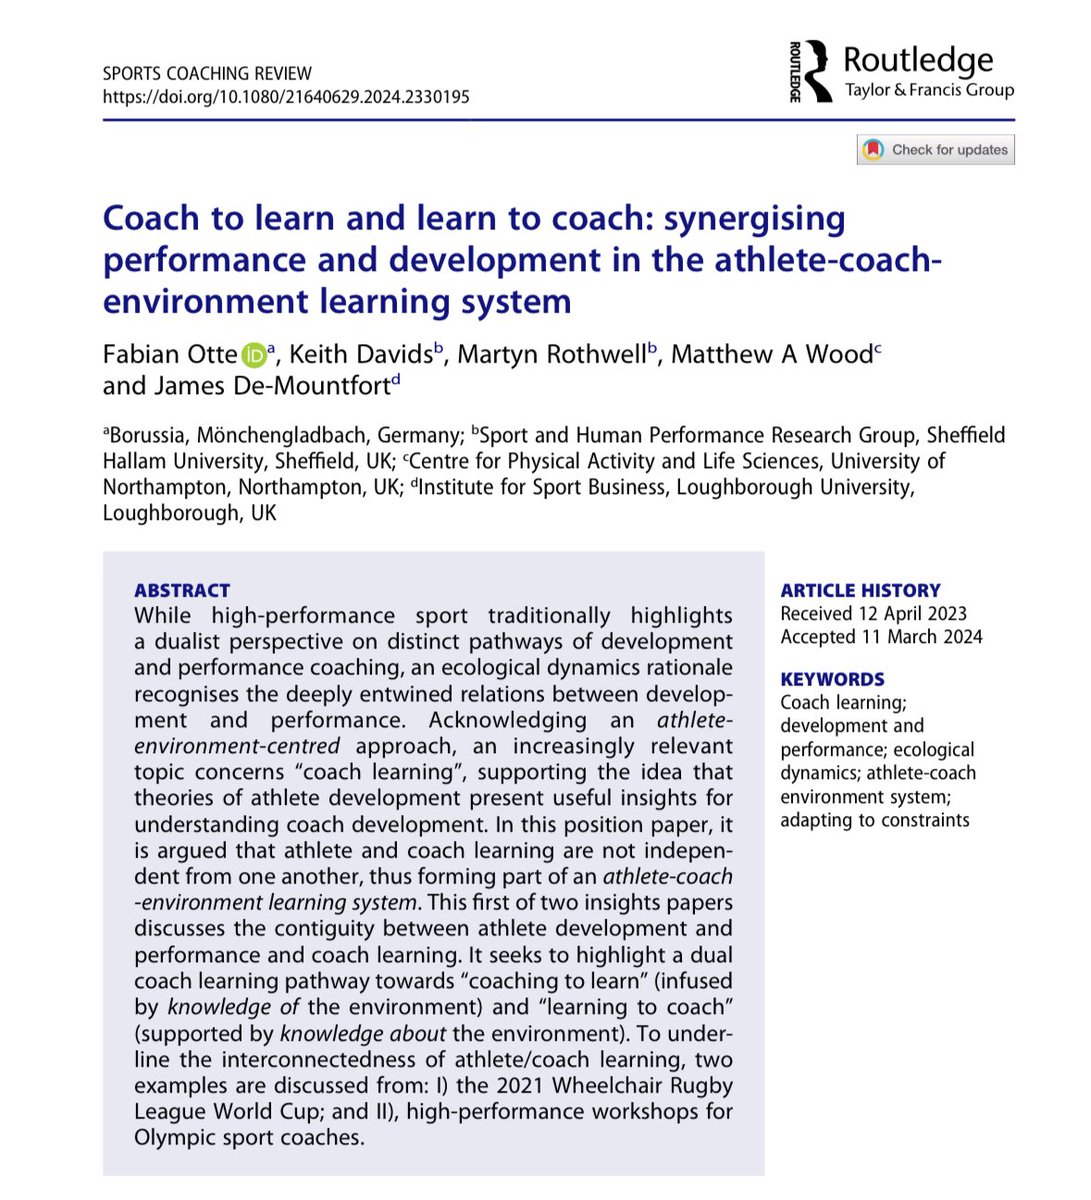 New Paper 📄❗️ Do we coach to learn or learn to coach? And how are development AND performance always connected? Usual 50 free copies here 😊 @CoachWood1 tandfonline.com/eprint/E78UZJZ…